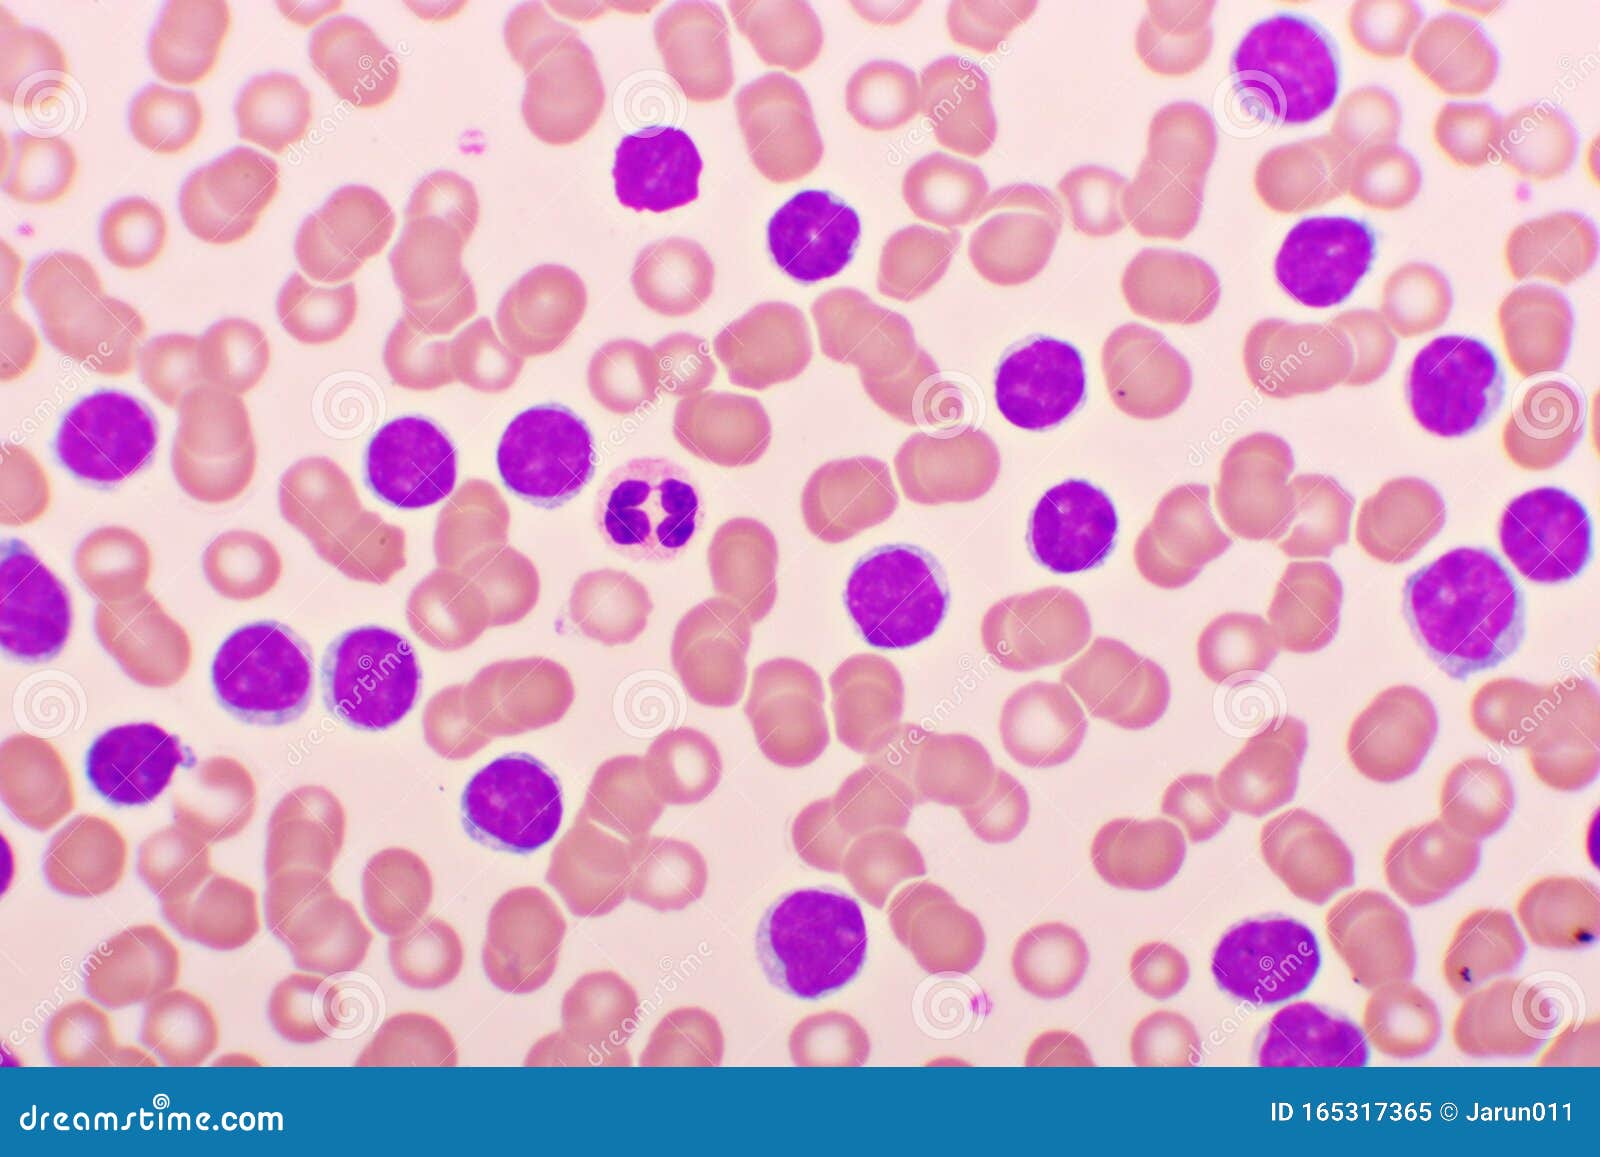 Blood Picture Of Chronic Lymphocytic Leukemia Or CLL Stock Image